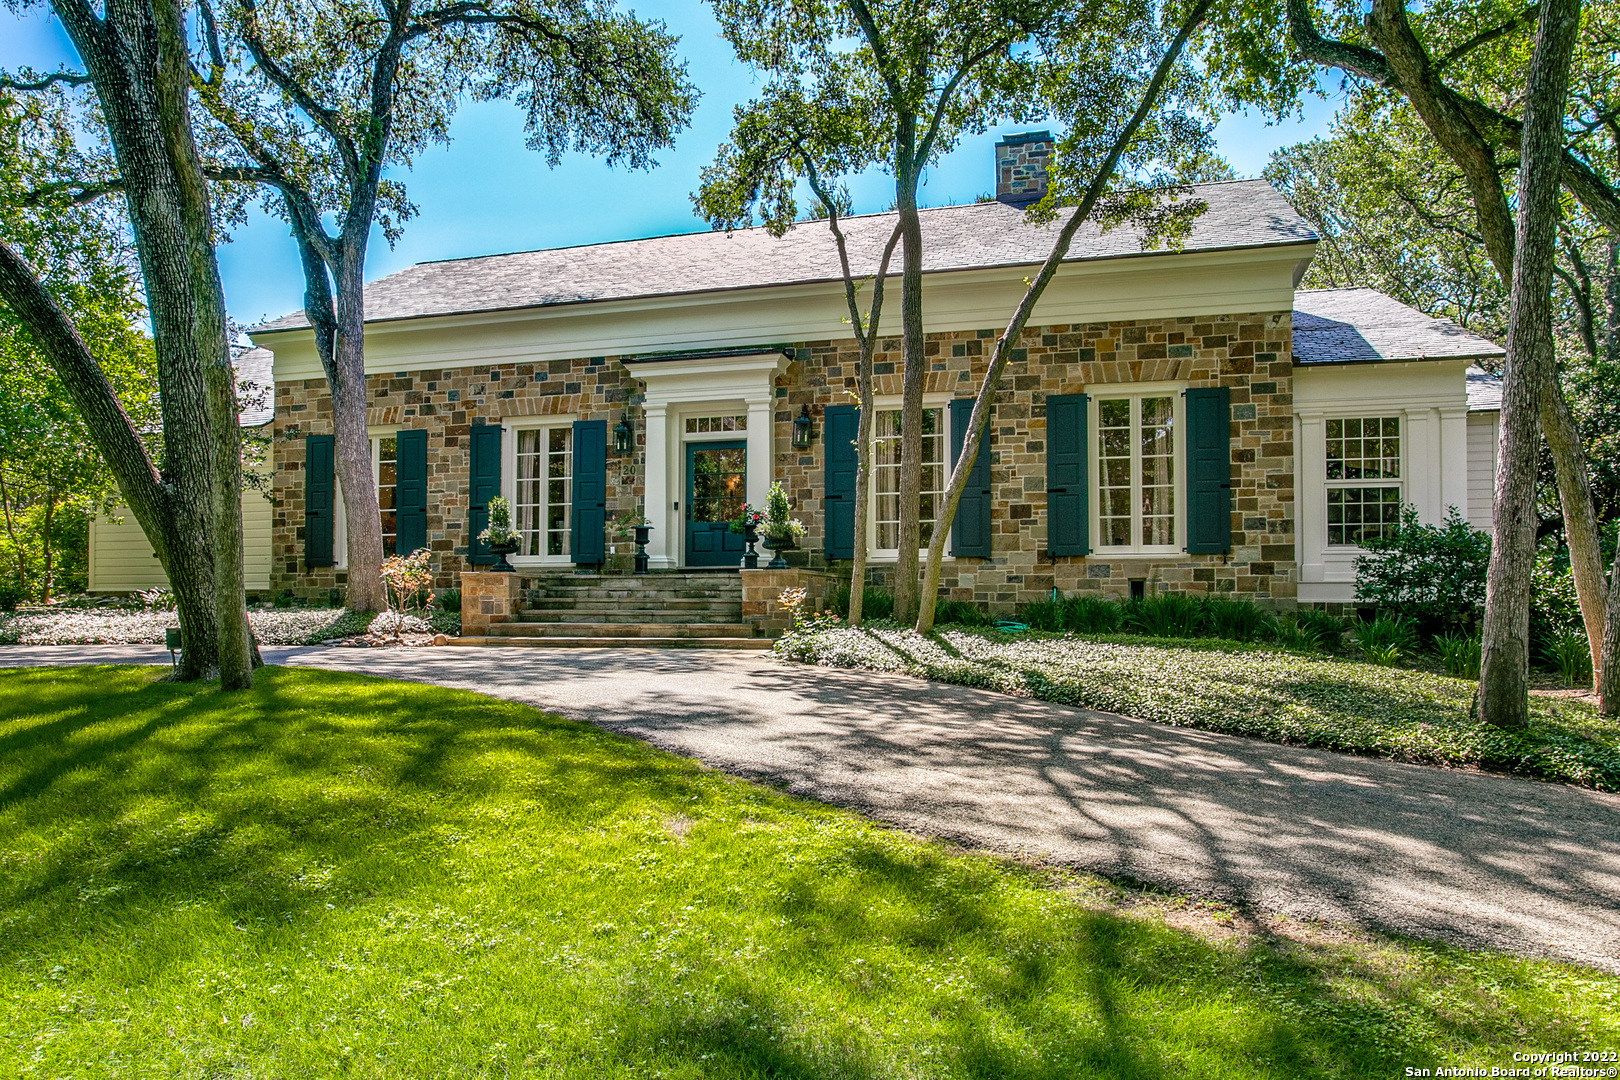 Situated on one of San Antonio's most desirable streets, this grand estate was built in 1927 by the Foster/Vaughn lumber family. Quality milled wood is on display throughout the interior of the home with many exceptional details. This beautiful home sits on nearly an acre of land, on a corner lot filled with stately oak trees and mature landscaping. The home is one of Alamo Heights earliest homes in this area. The home has four bedrooms, five bathrooms, one half bath, various living areas, beautiful pool, gazebo, three-car garage and large circular drive. AHISD highly acclaimed schools and close proximity to restaurants, airport and shopping.